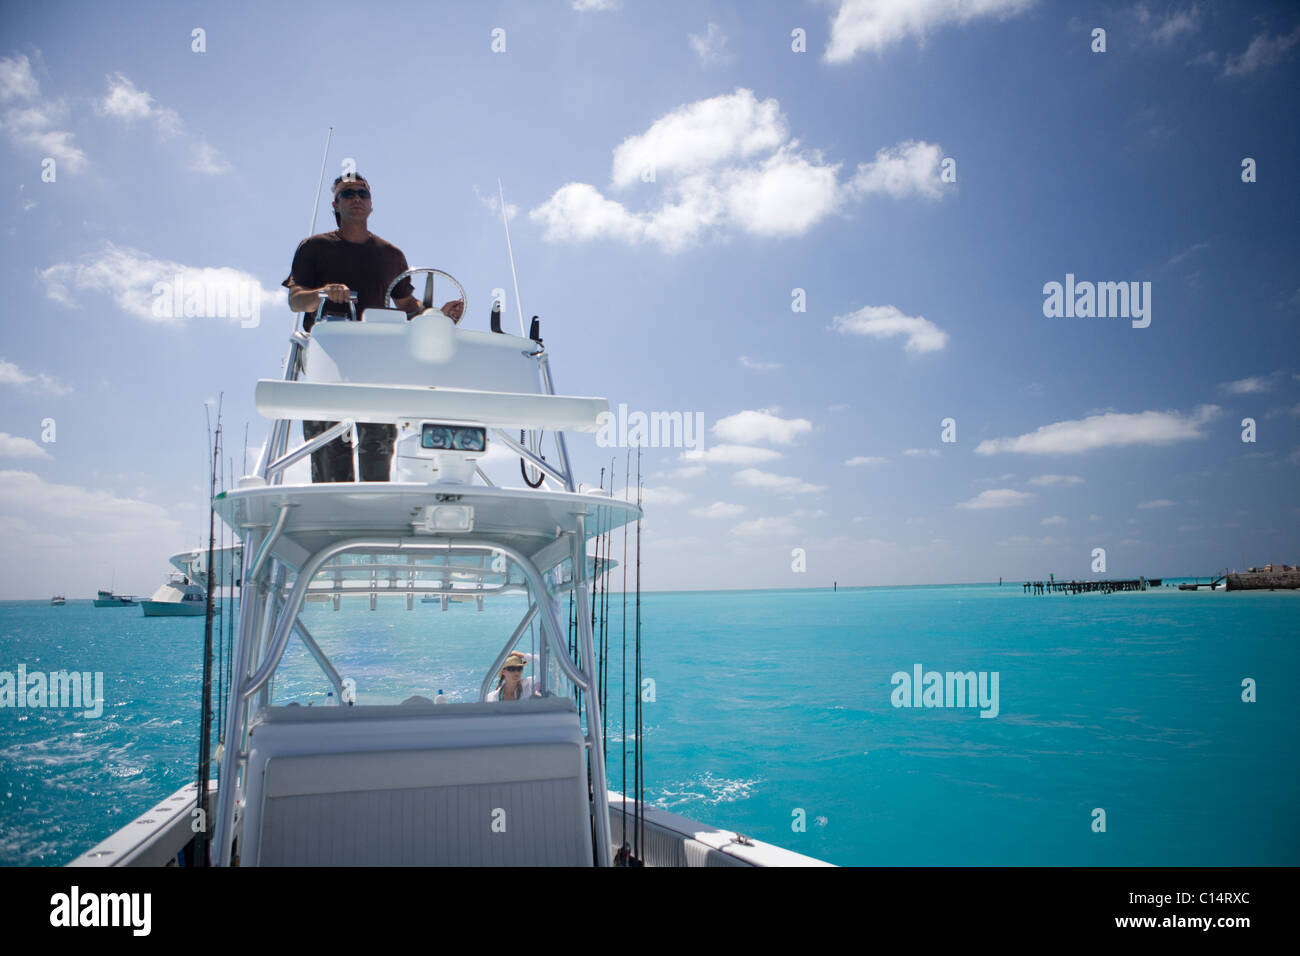 A fisherman steers his boat from the fly bridge negotiating blue-green tropical waters. Stock Photo